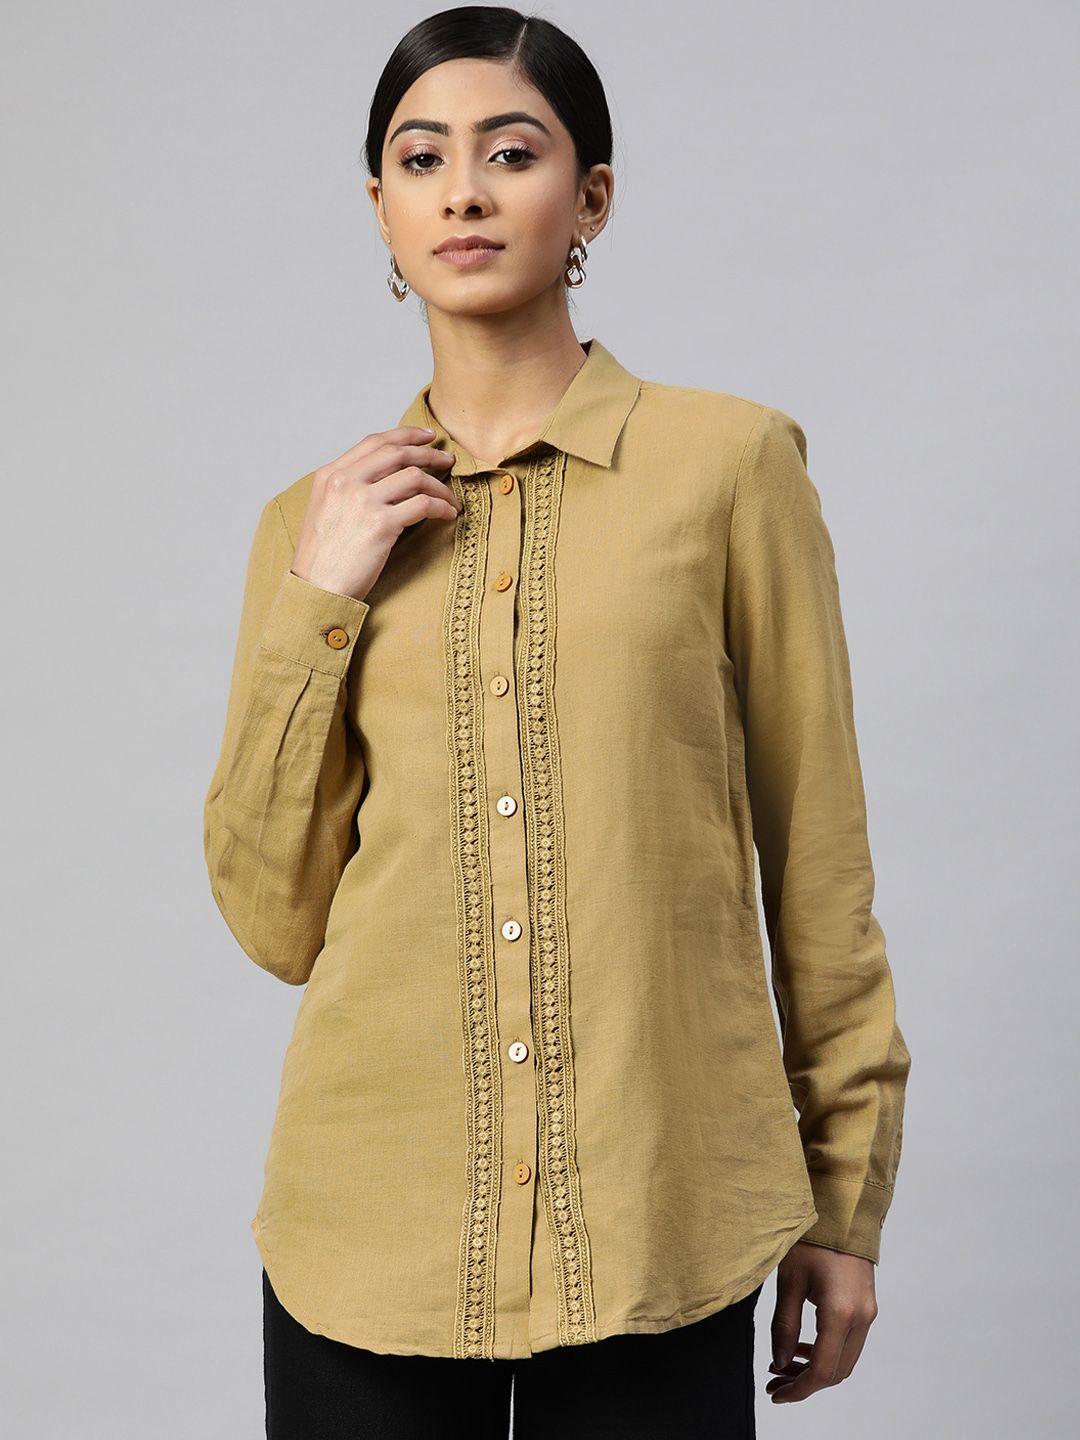 marks & spencer brown shirt style top